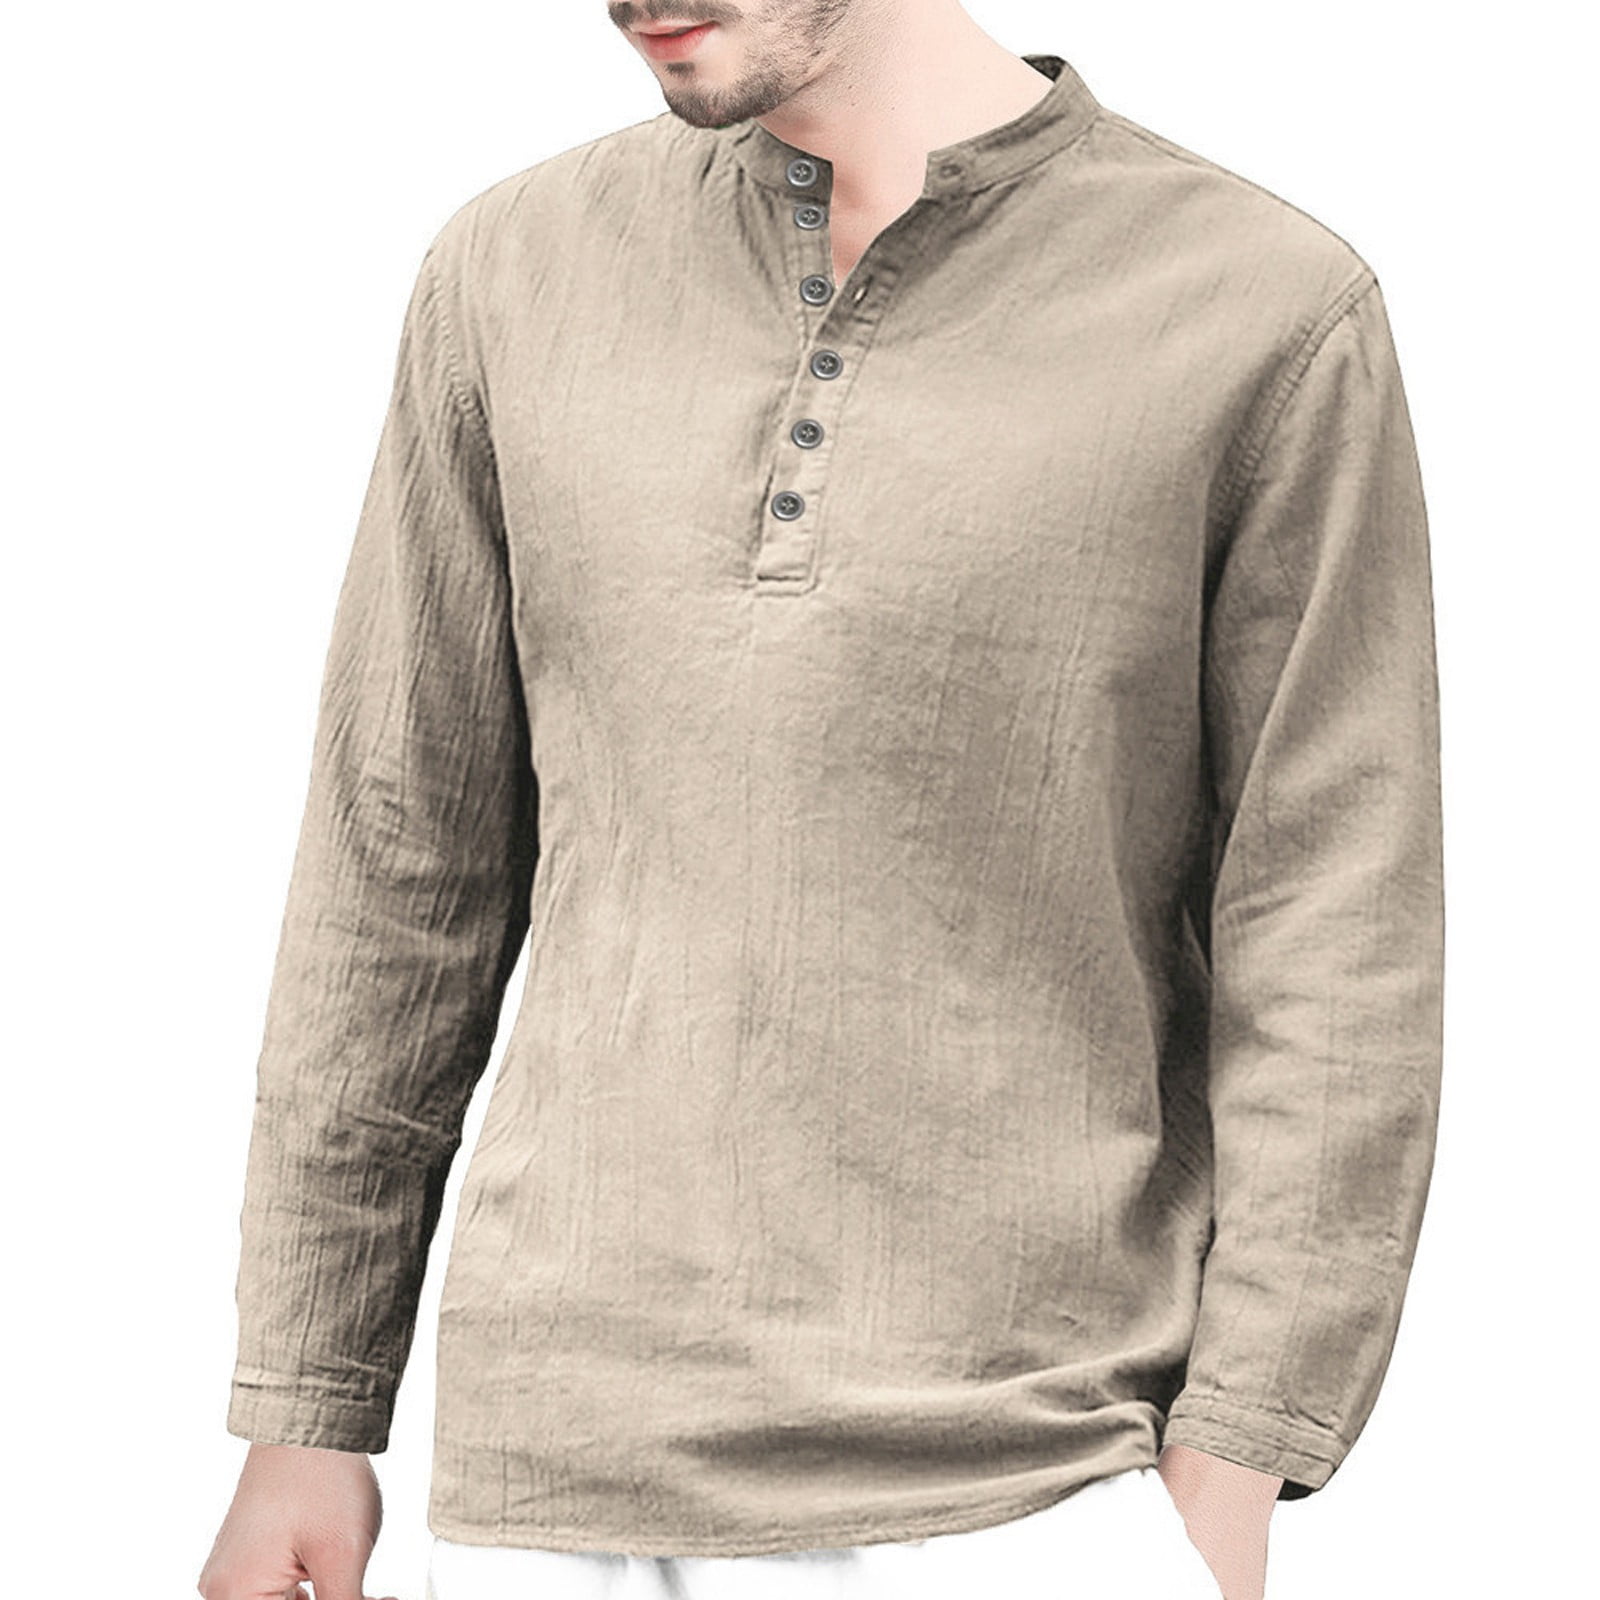 Ethnic Style Baggy Cotton Linen Shirt,Men Retro 3/4 Sleeve T-Shirts Tops Summer Beach Loose Blouse Tees Work Clothes 